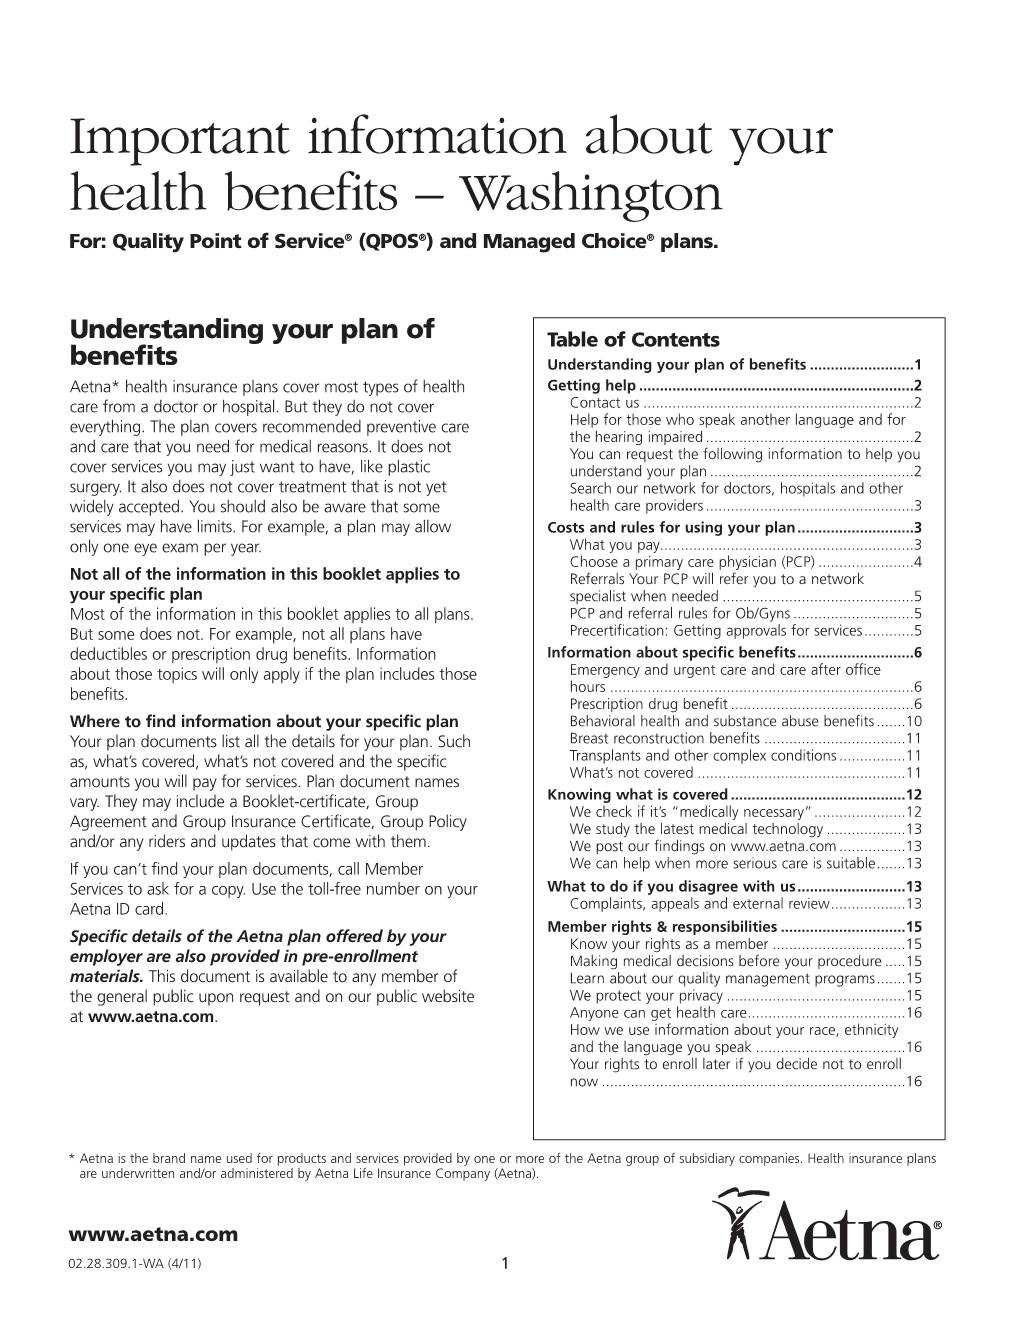 Important Information About Your Health Benefits – Washington For: Quality Point of Service® (QPOS®) and Managed Choice® Plans